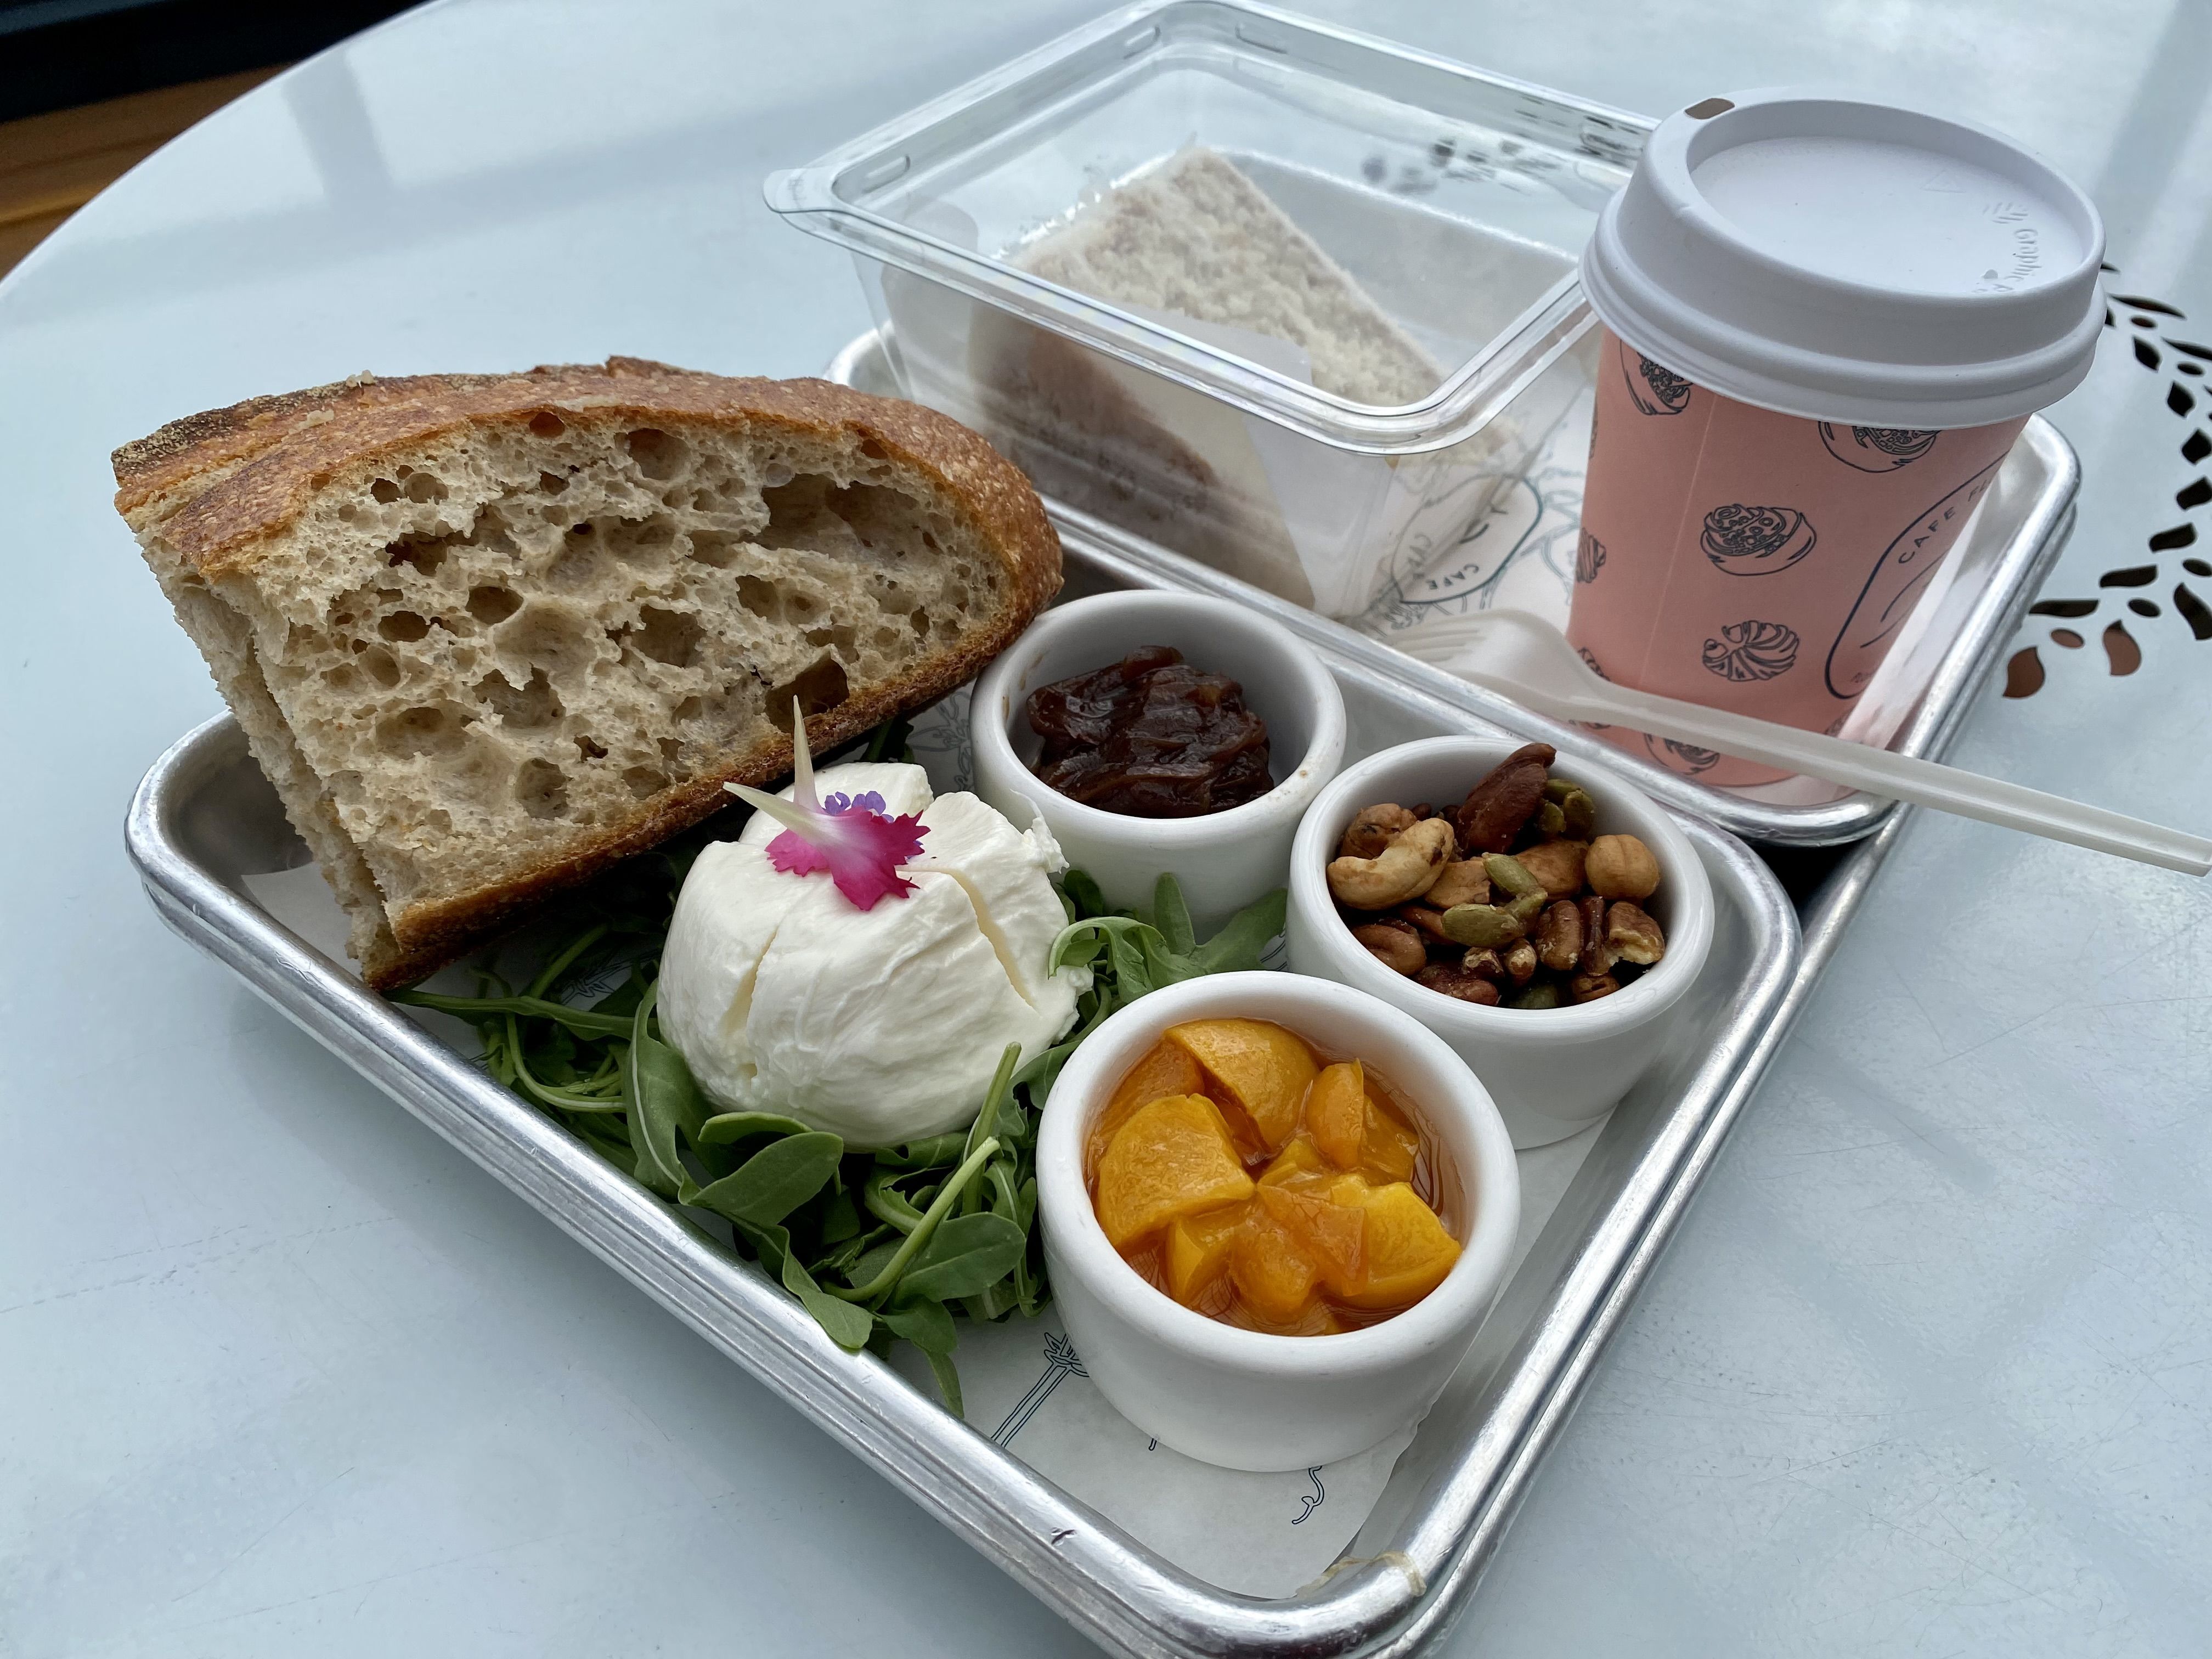 A metal tray with slices of bread, a ball of burrata and various compotes, plus a coffee cup and a clear box with a slice of cake inside.